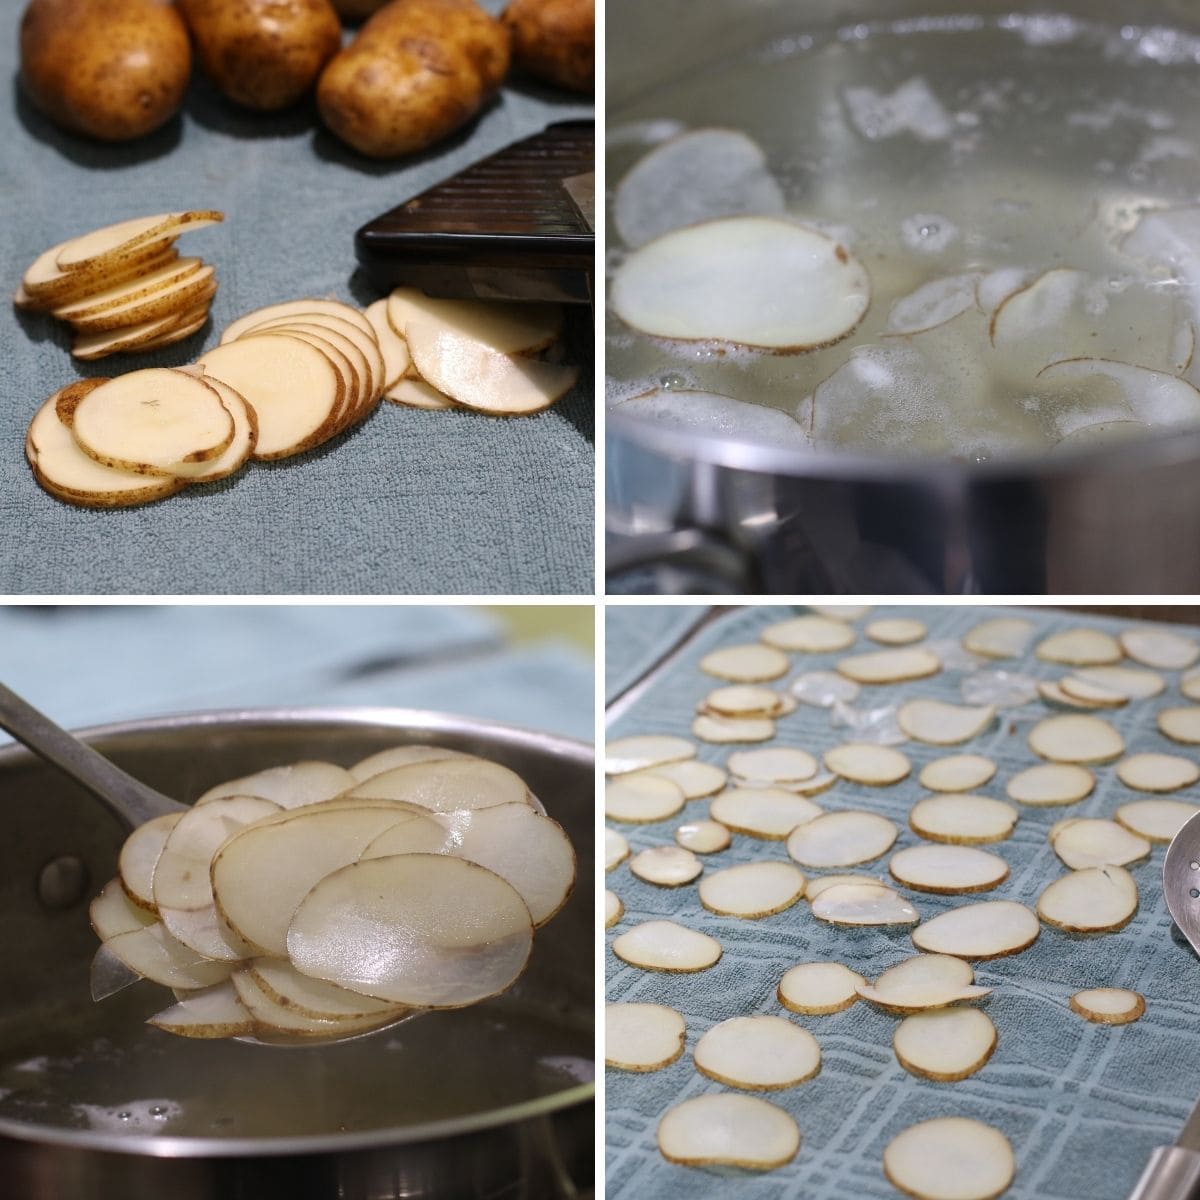 process of making homemade chips, slicing, boiling, draining.